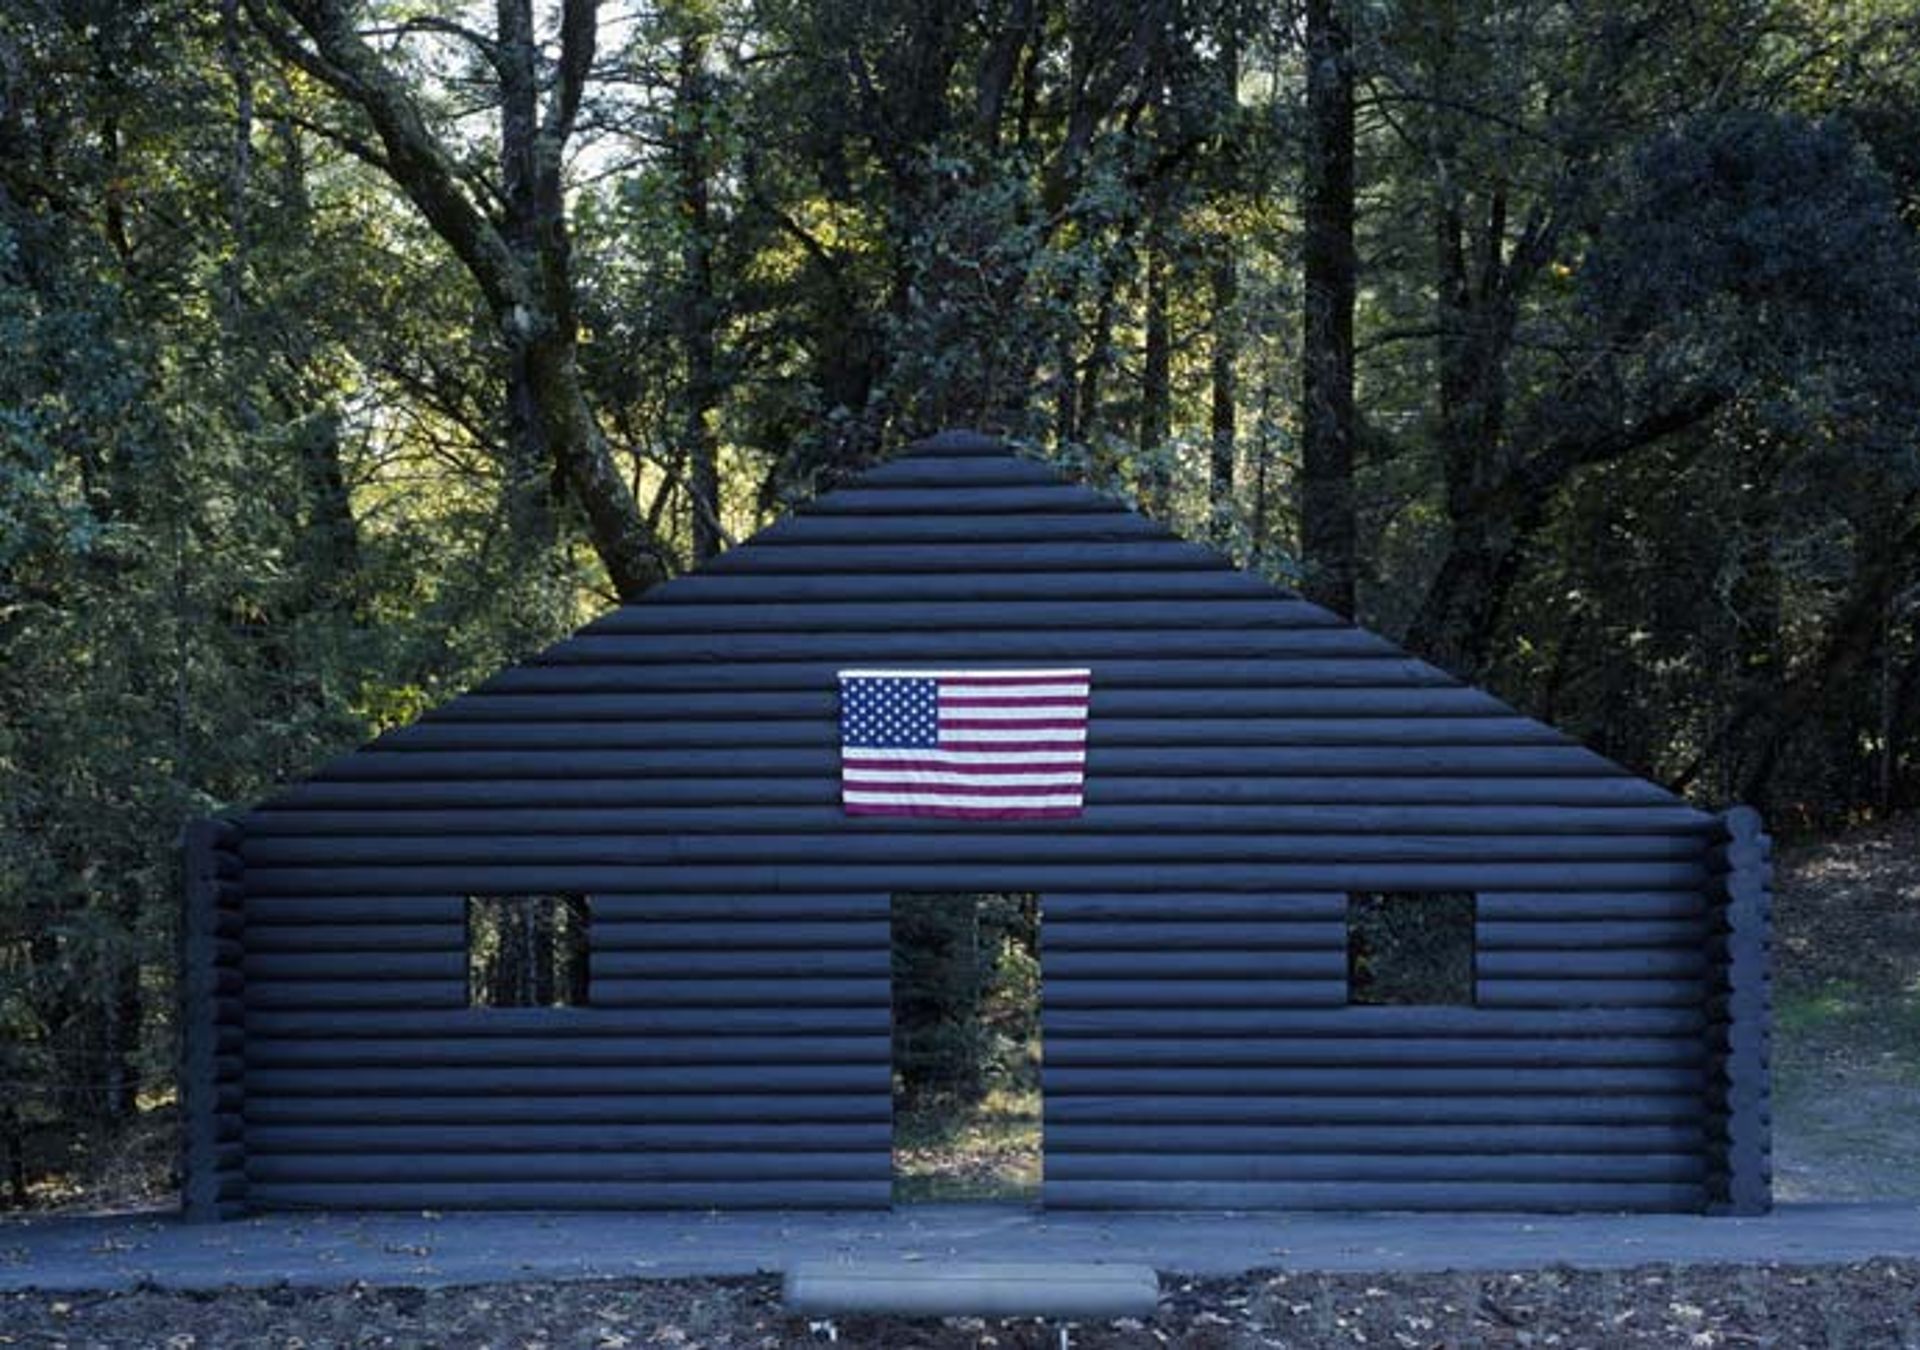 A different version of Cady Noland's Log Cabin, Blank with Screw Eyes and Café Door (Memorial to John Caldwell) (1993), from the collection Norman & Norah Stone Photo: stonescape.us